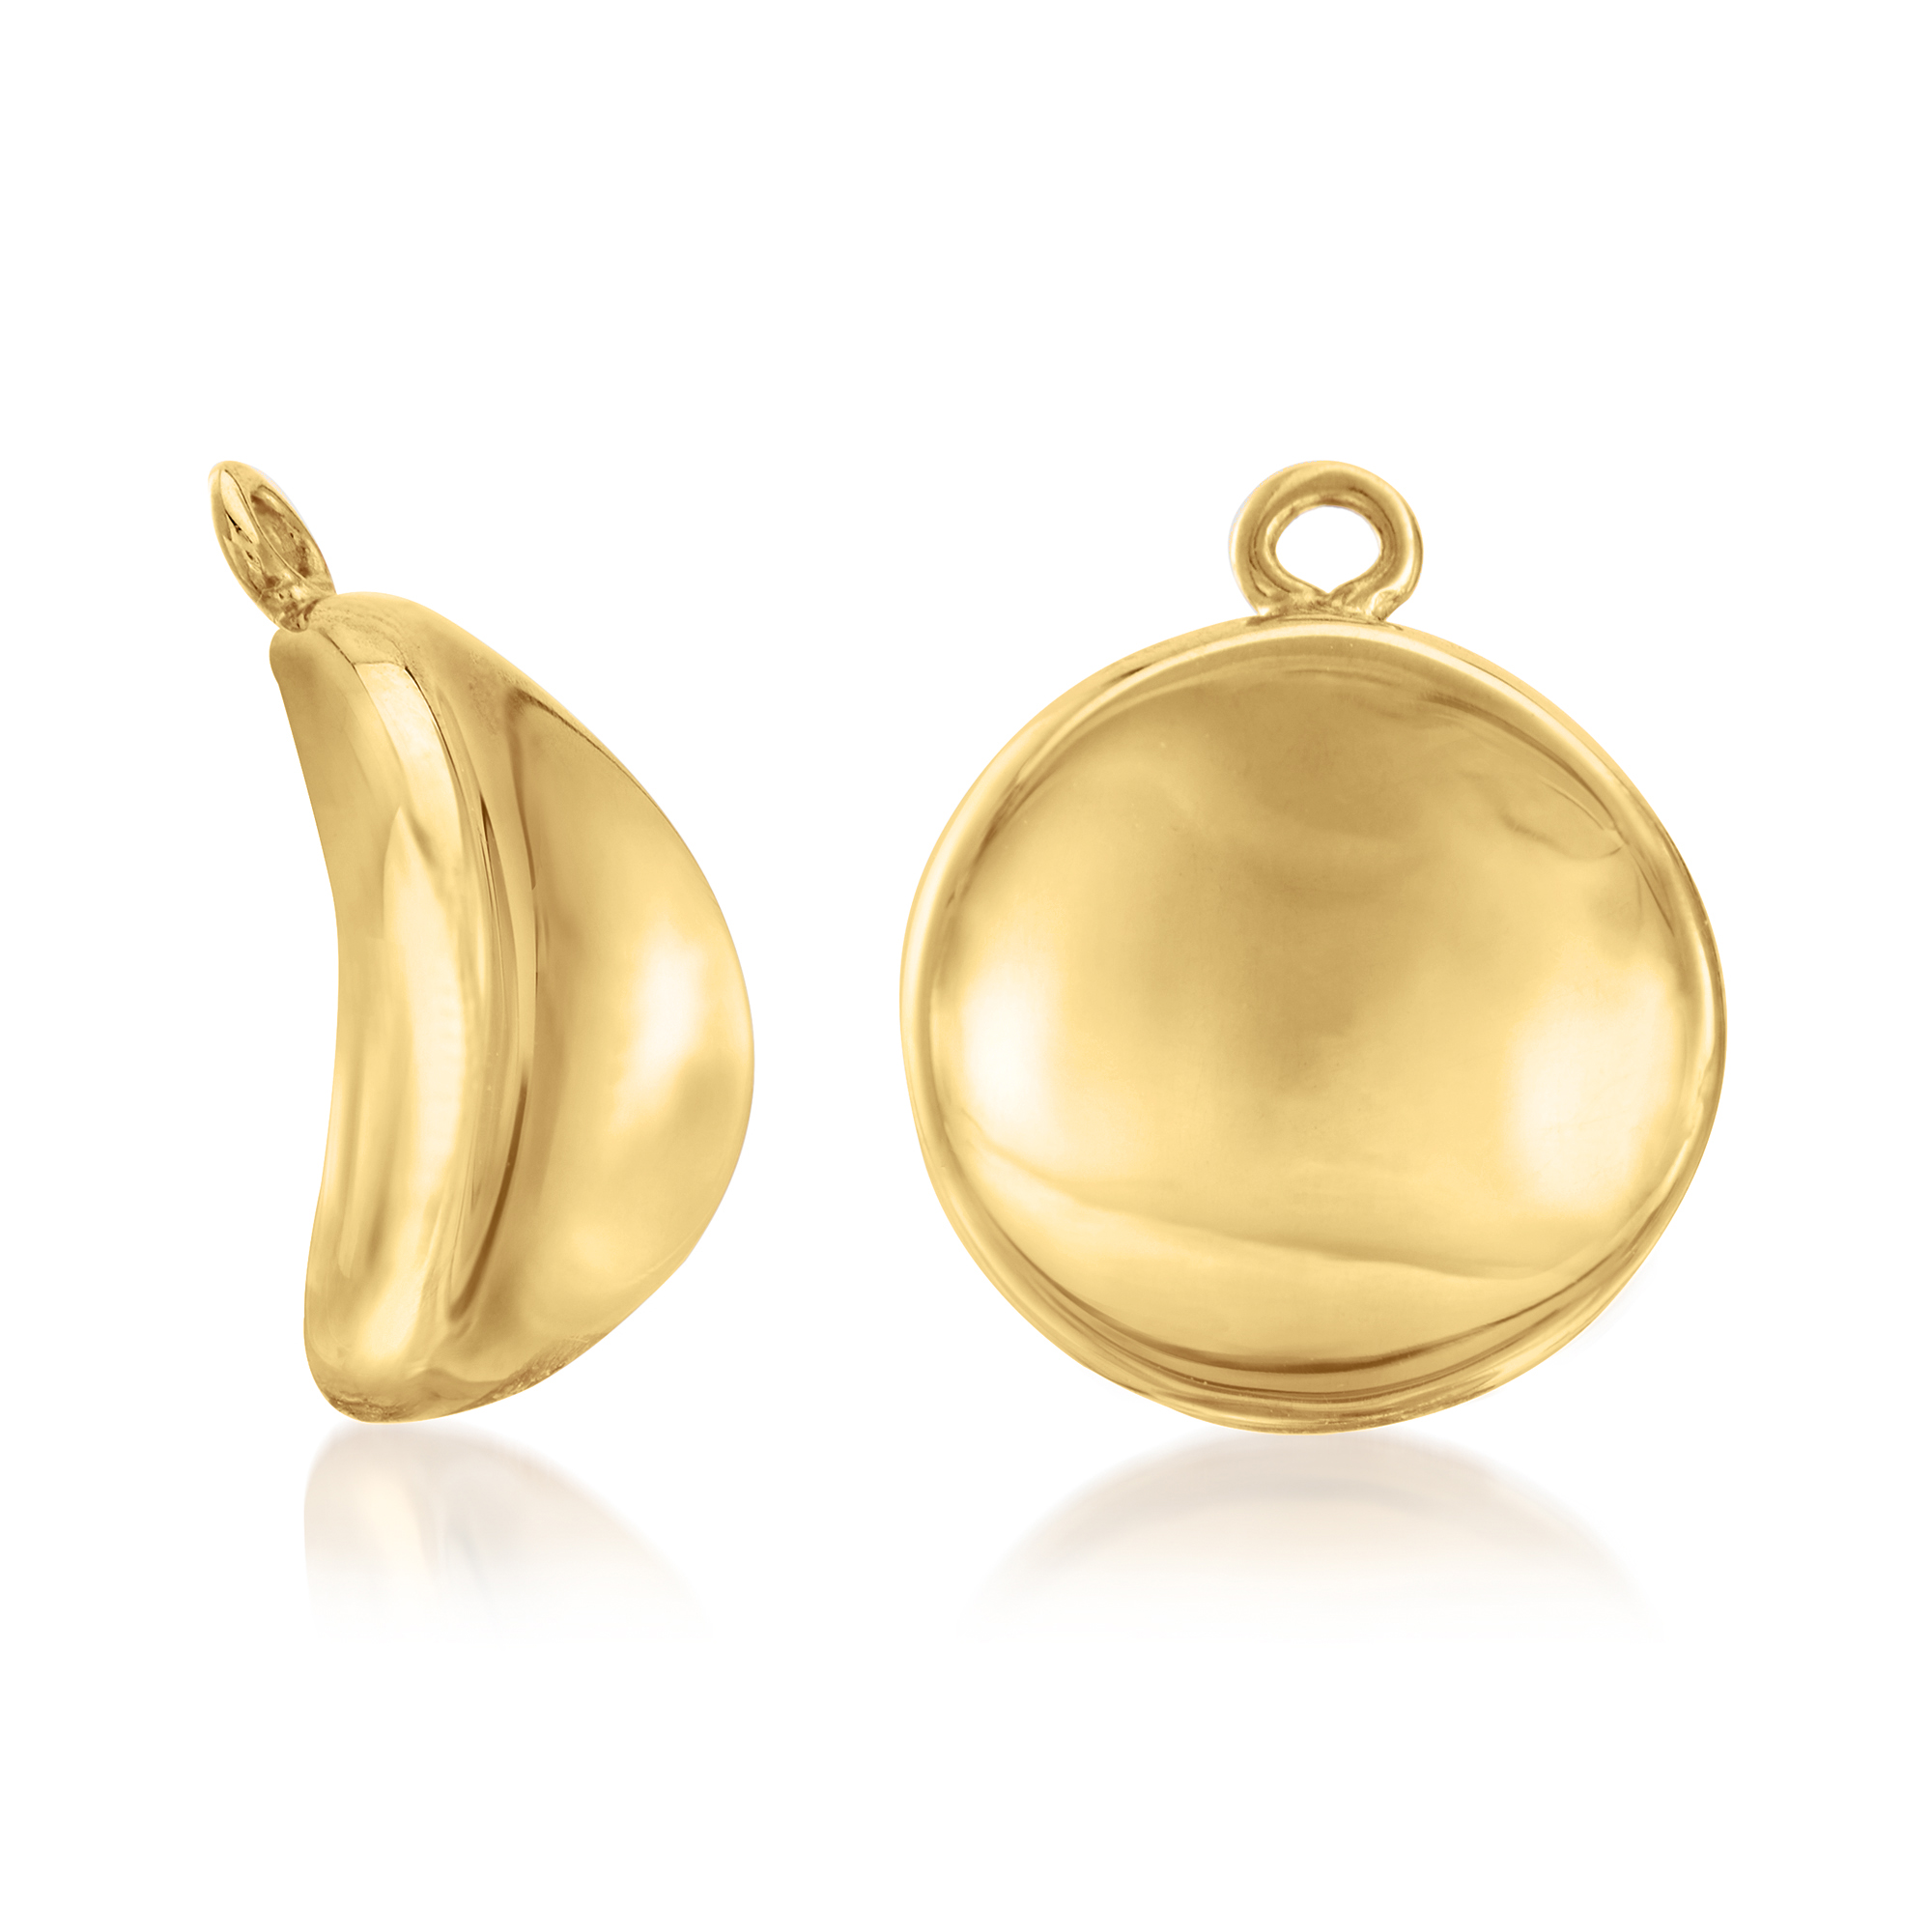 Ross-Simons 14kt Yellow Gold Concave Petite Disc Drop Earring Jackets, Women's, Adult - image 3 of 5